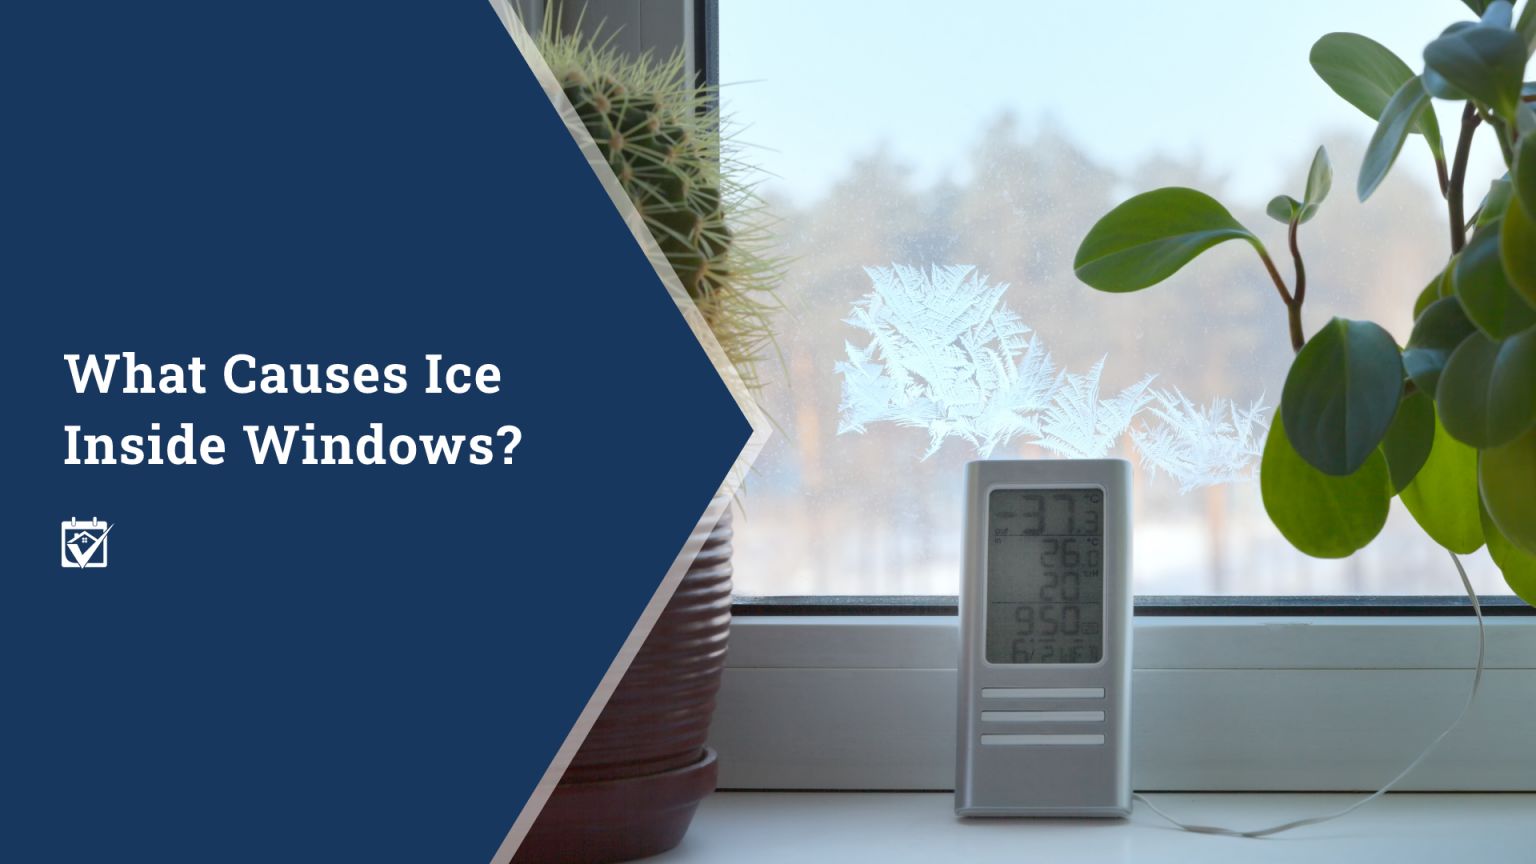 What Causes Ice Inside Windows?